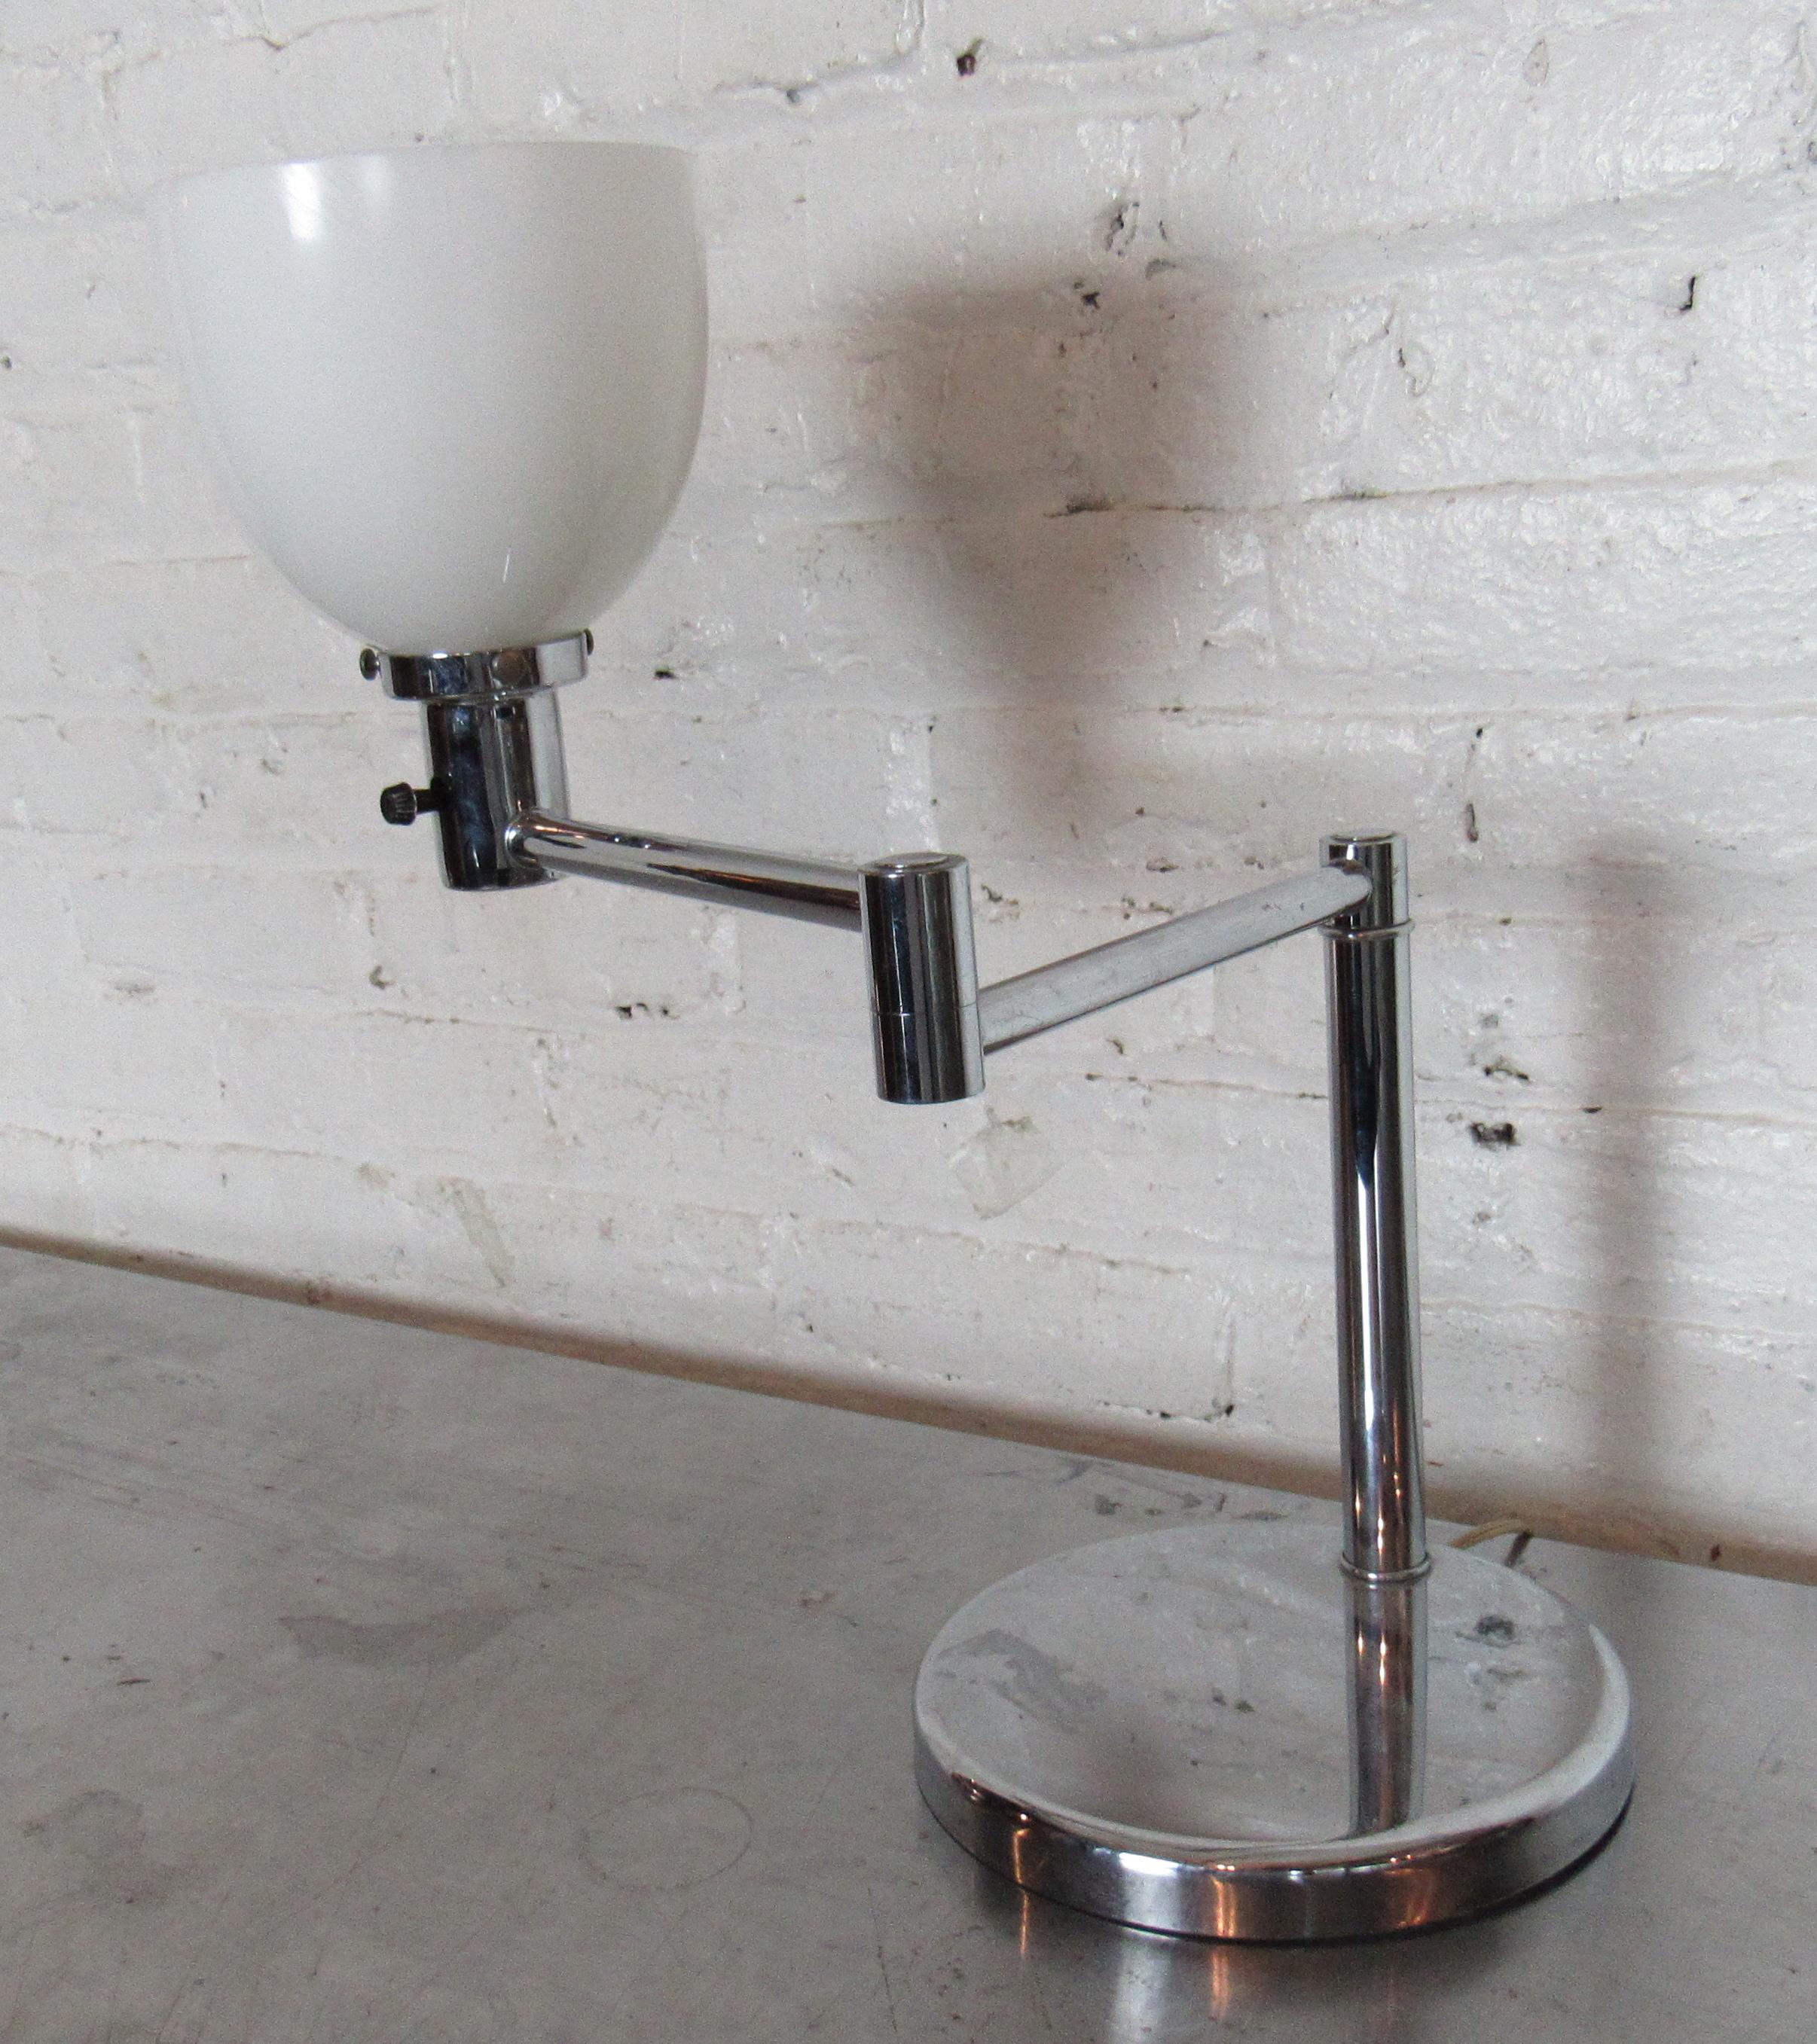 Vintage modern style table or desk lamp by Walter Von Nessen.

(Please confirm item location - NY or NJ - with dealer).